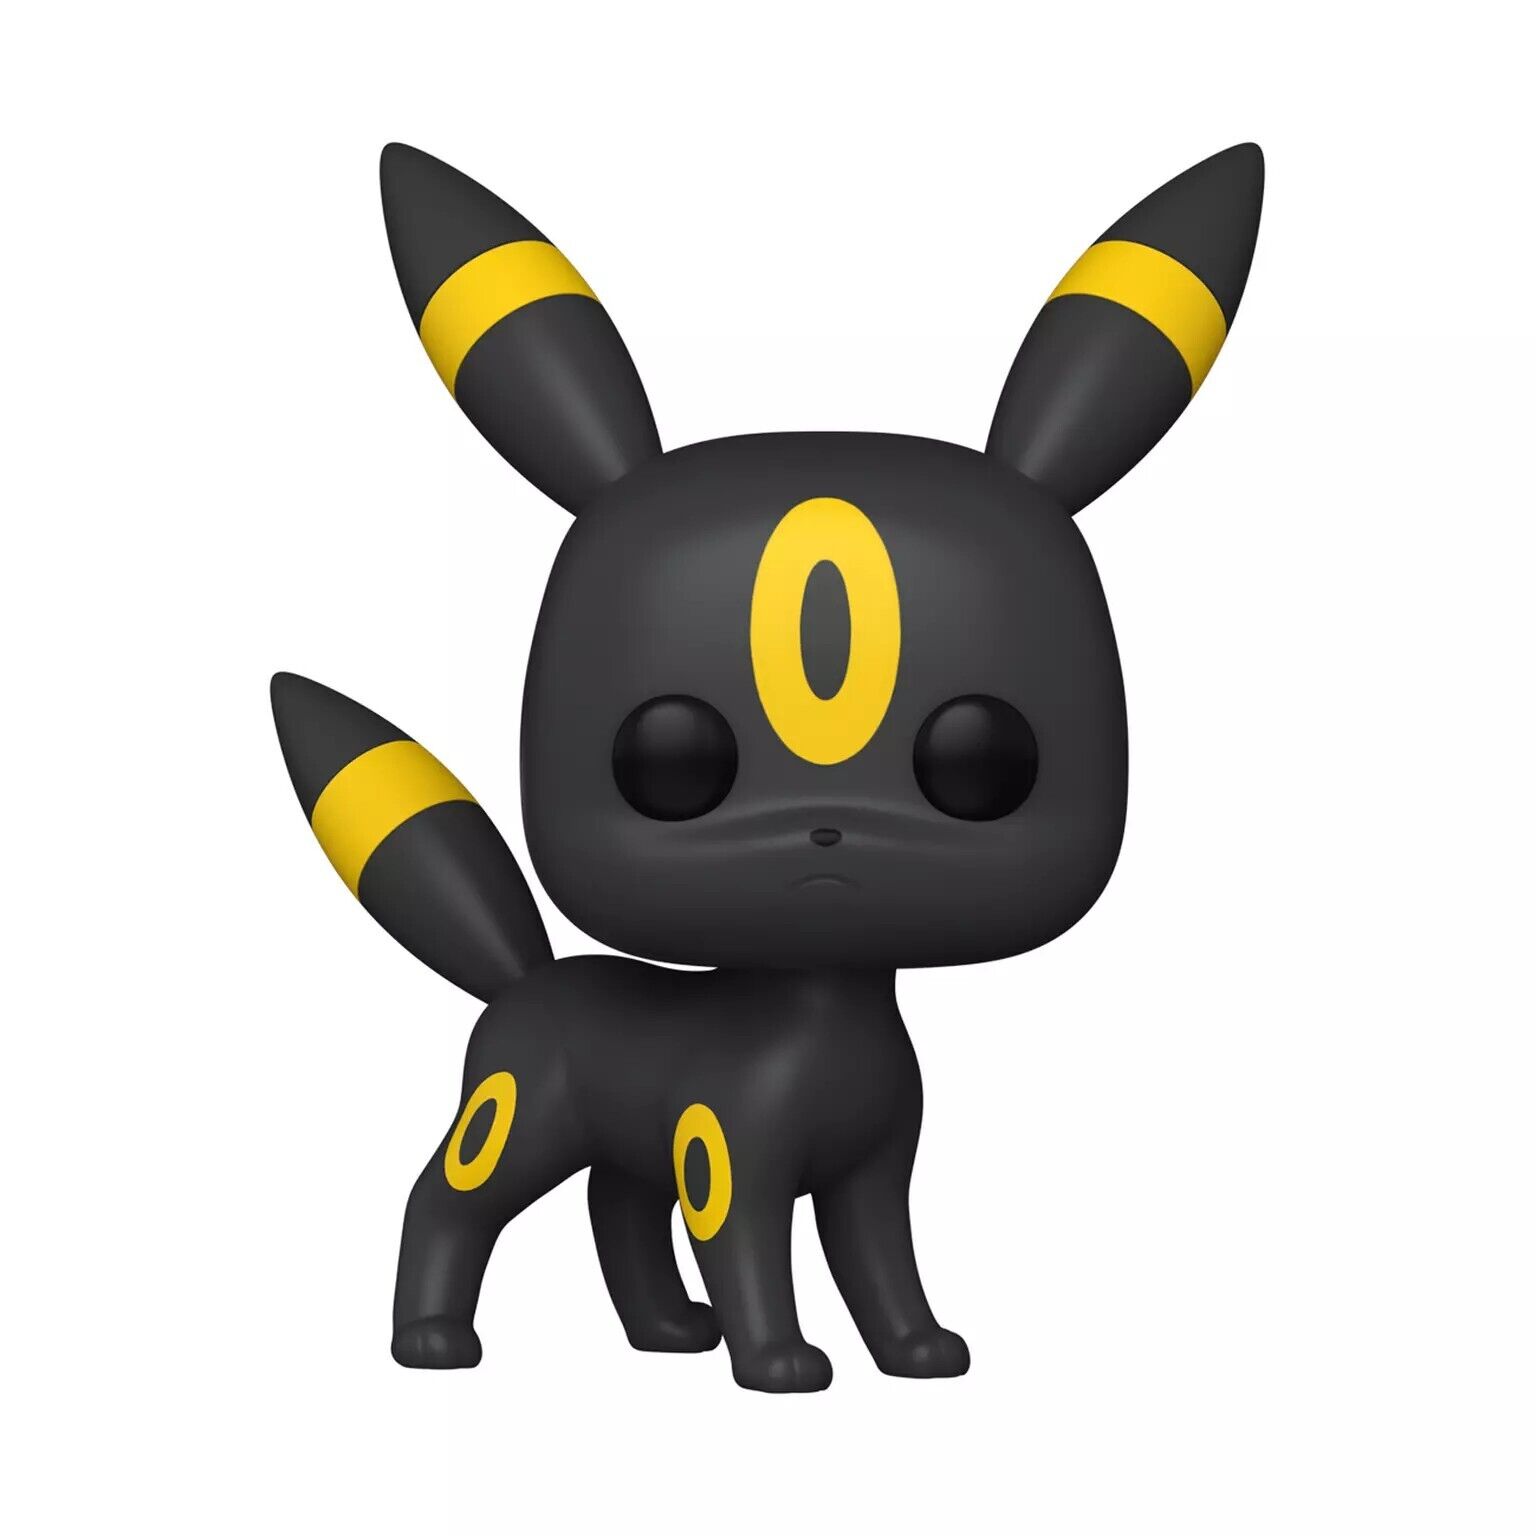 Umbreon Funko Pop  Exclusive Pre Order I'll Get From Funko Directly Ships ASAP